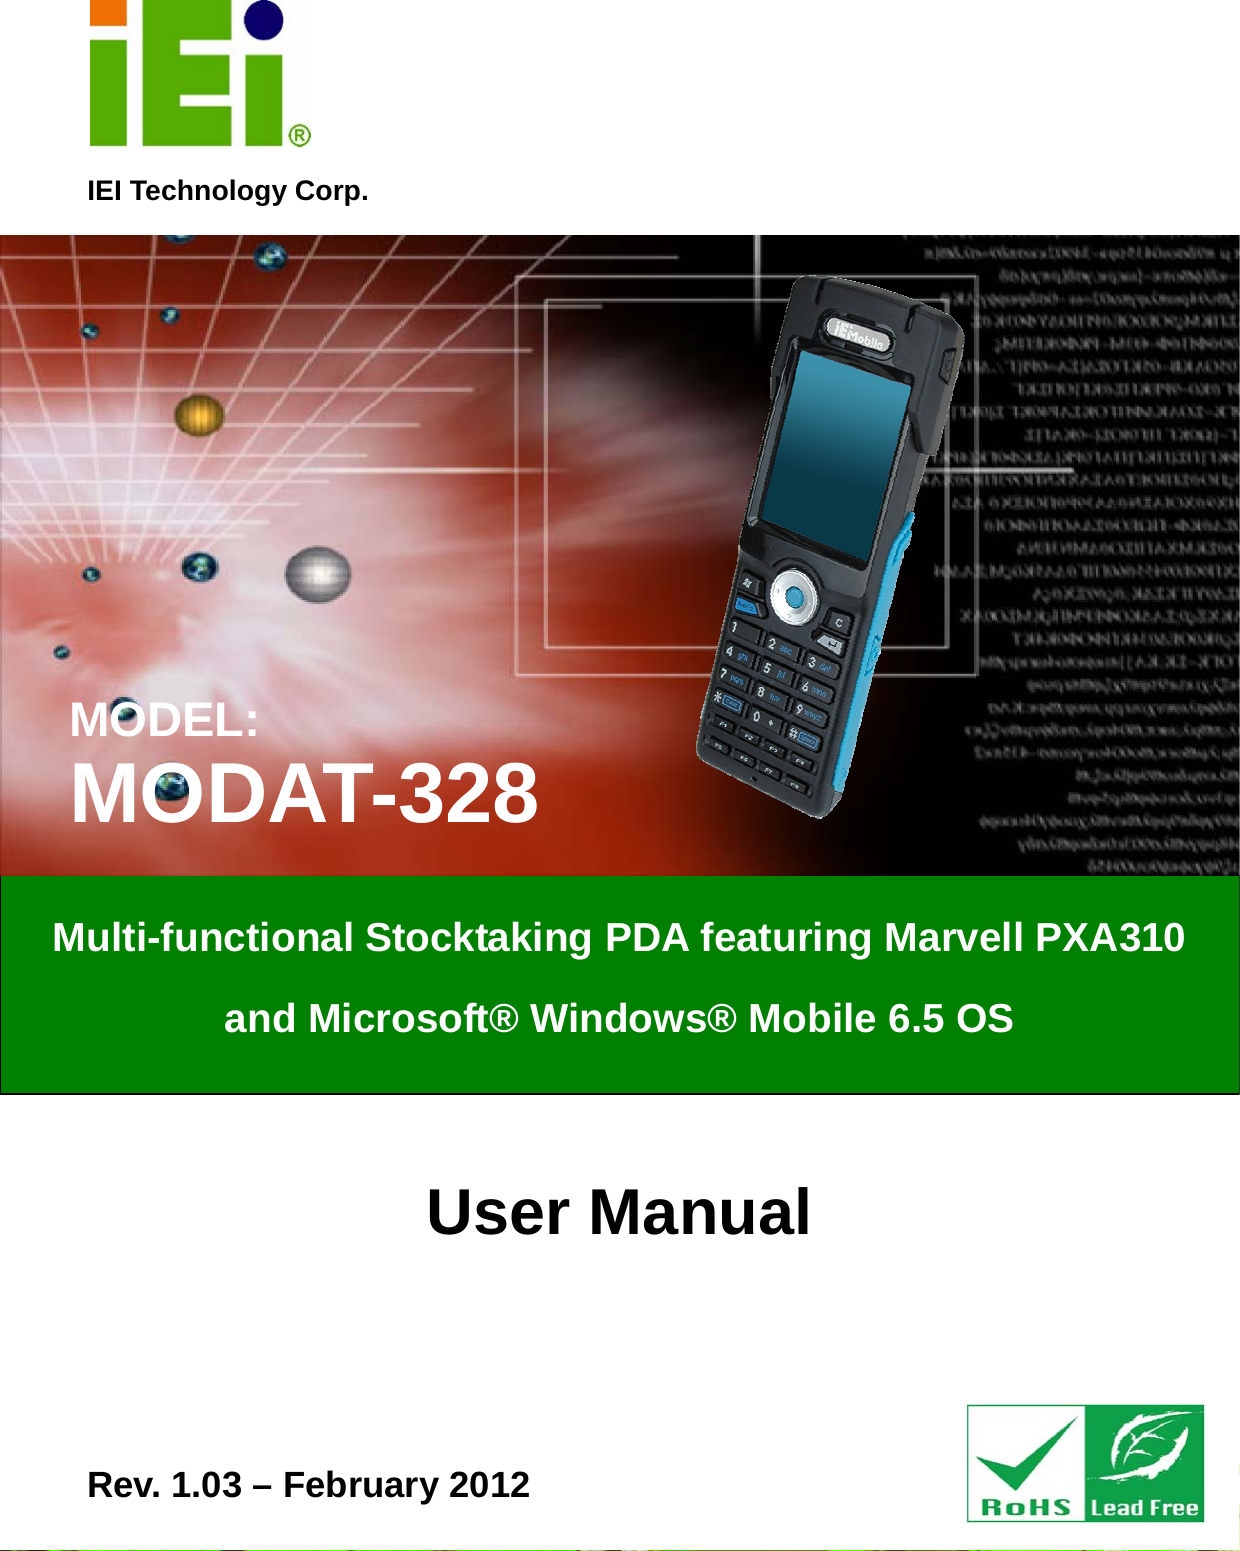   MODAT-328 Page IIEI Technology Corp. User Manual  MODEL: MODAT-328 Multi-functional Stocktaking PDA featuring Marvell PXA310 and Microsoft® Windows® Mobile 6.5 OS Rev. 1.03 – February 2012 